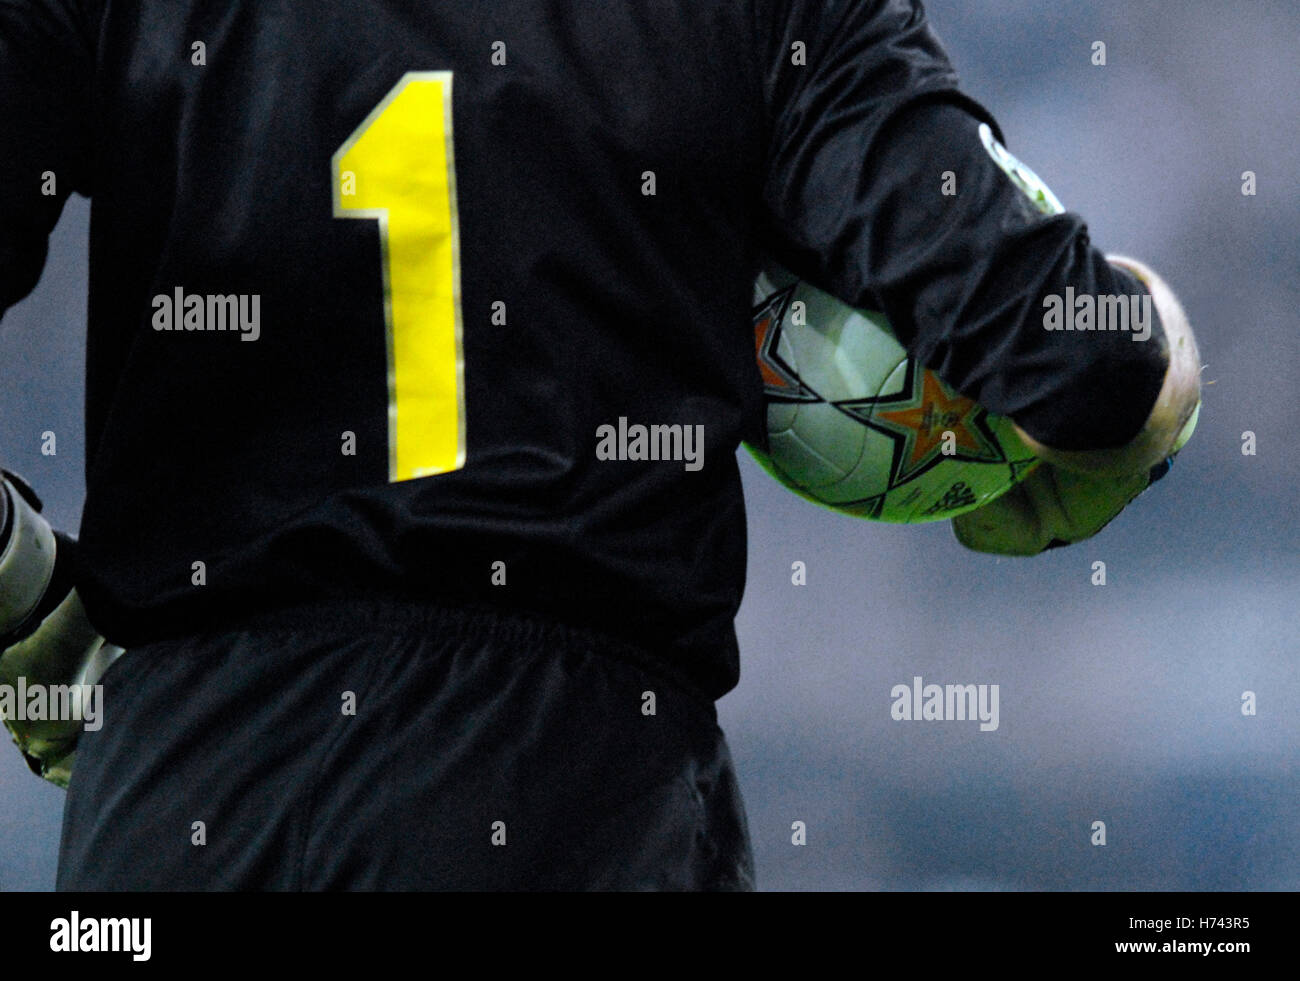 Goalkeeper Victor Valdes with the number 1 and football, Champions League, season 2007/2008, quarter-final first leg Stock Photo